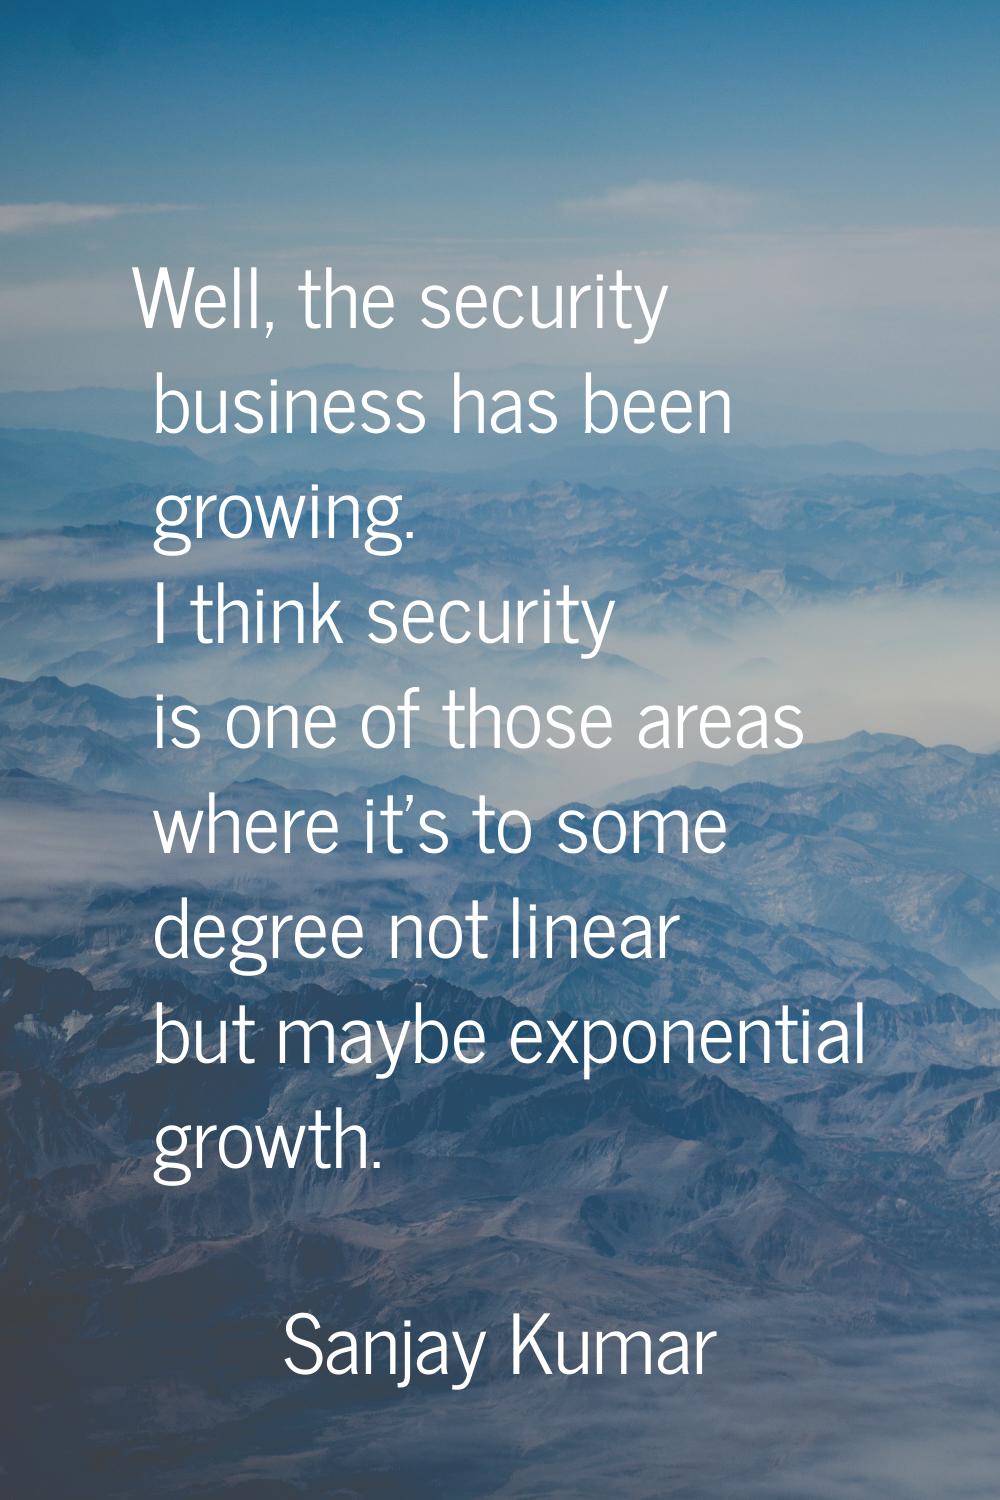 Well, the security business has been growing. I think security is one of those areas where it's to 